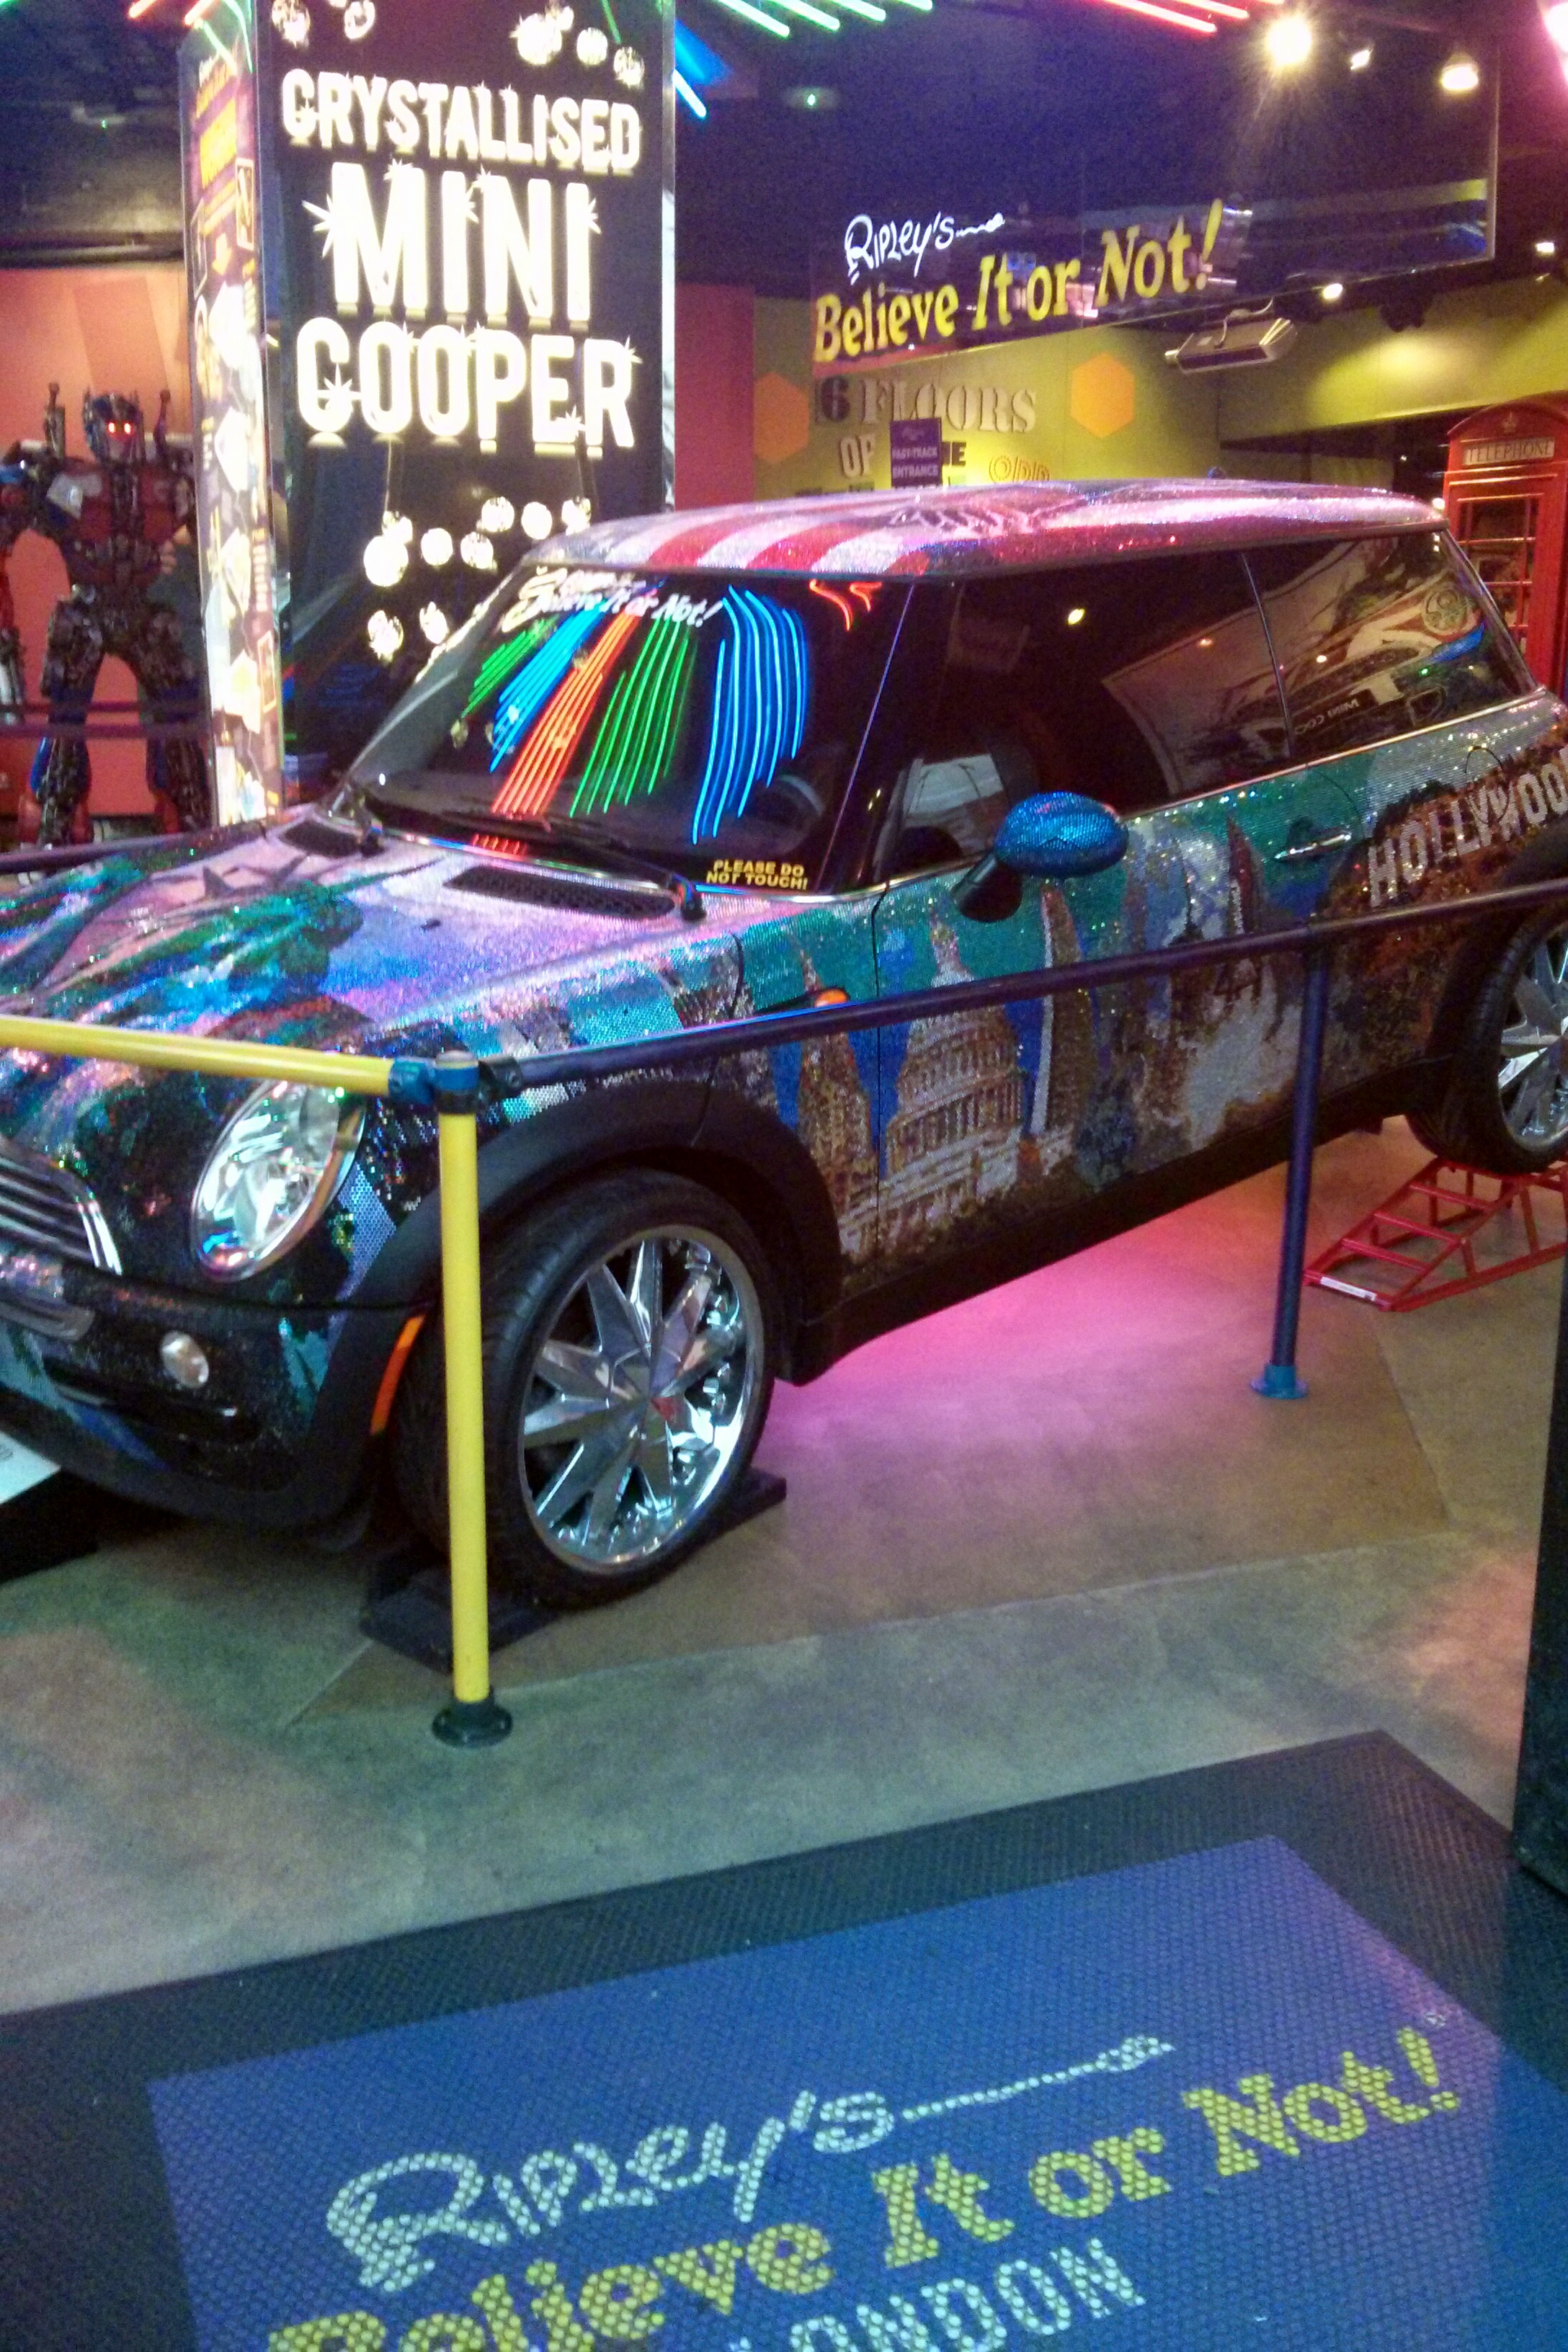 Picture Wednesday - Crystallised Car